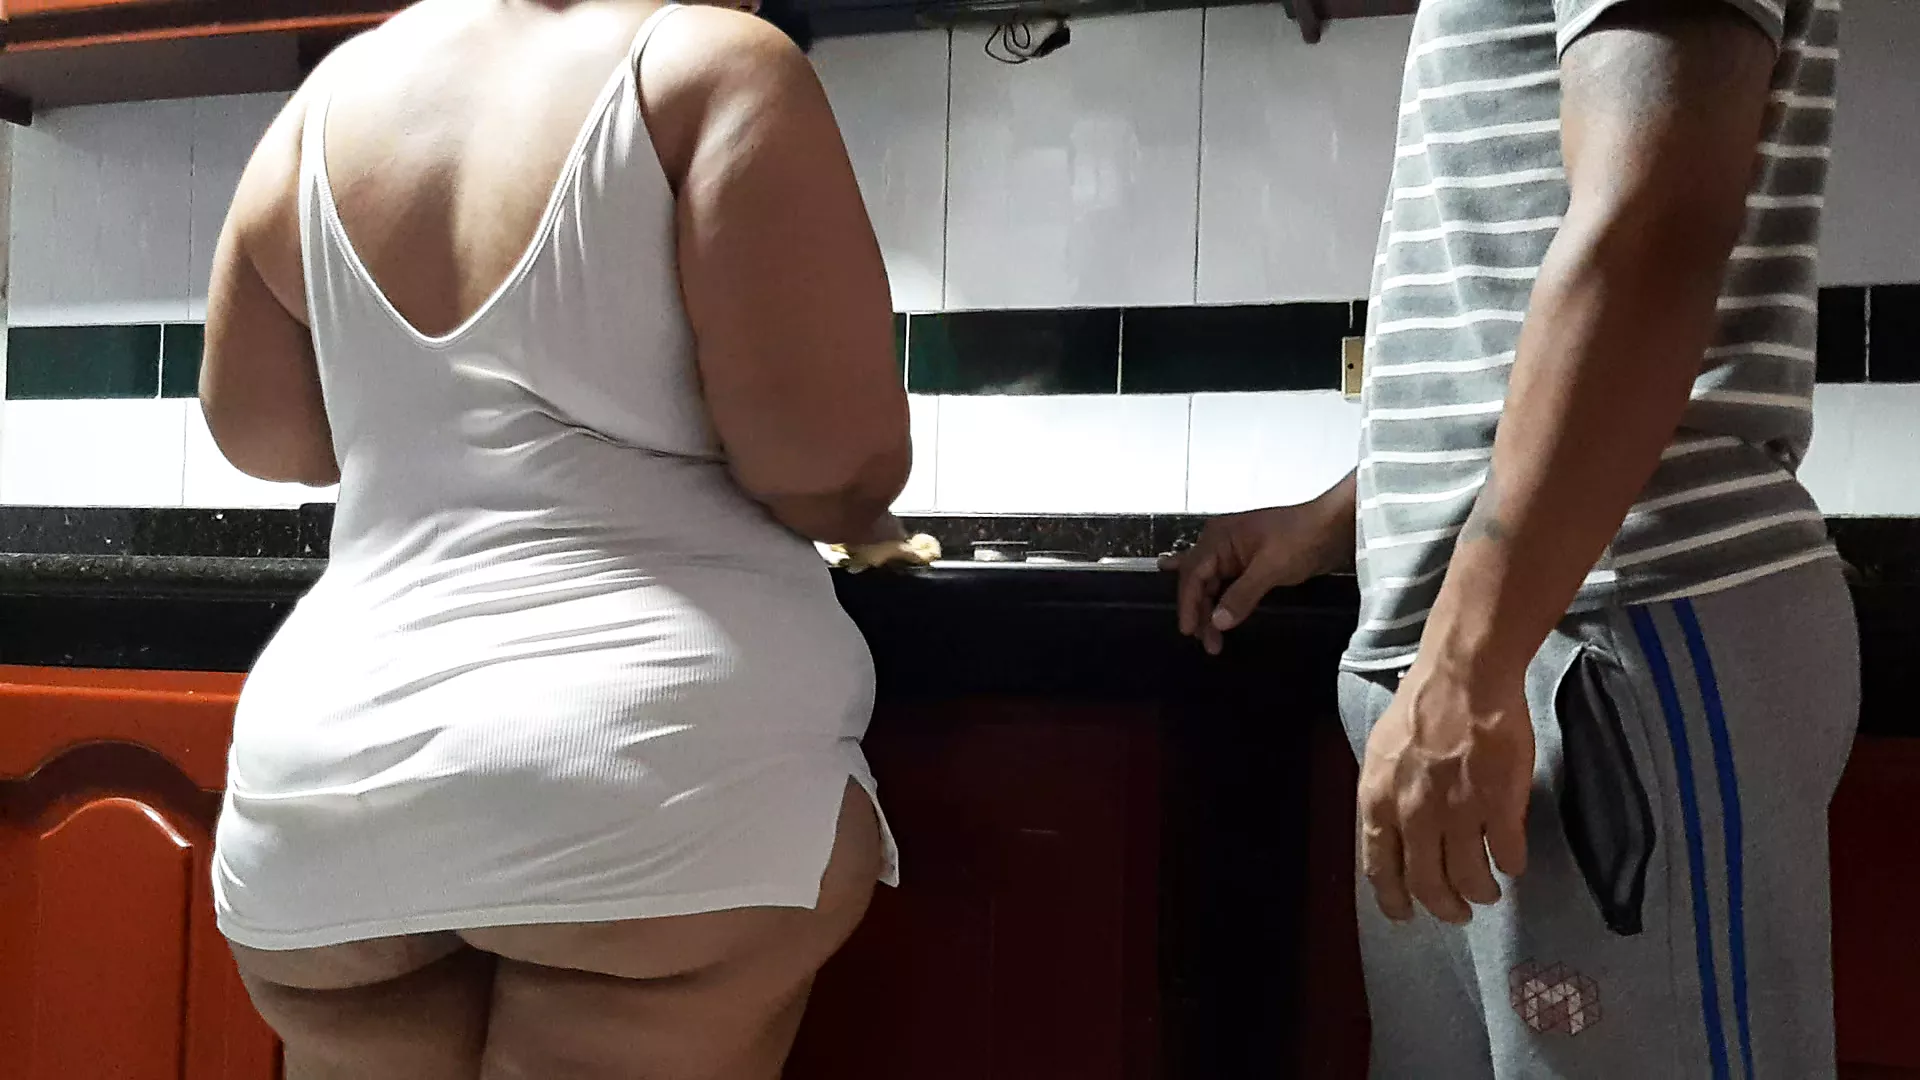 I Found My Best Friend's Mom Pantyless in the Kitchen | xHamster